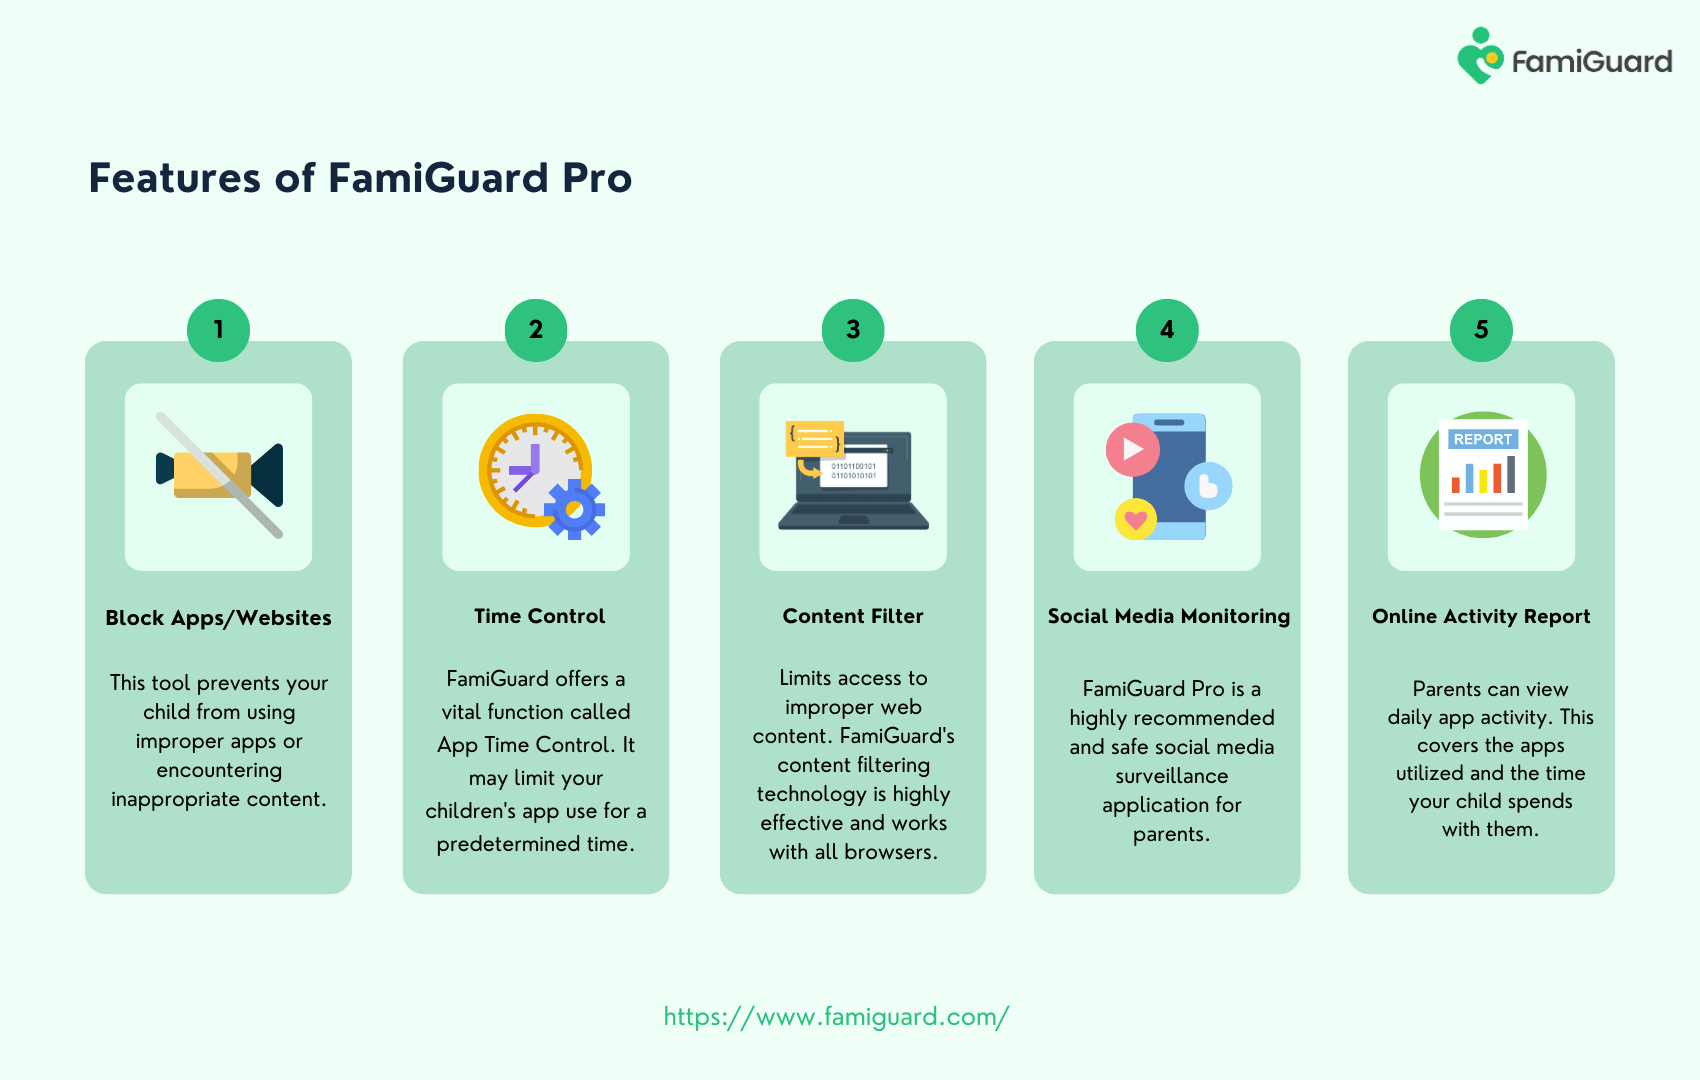 Features of FamiGuard Pro